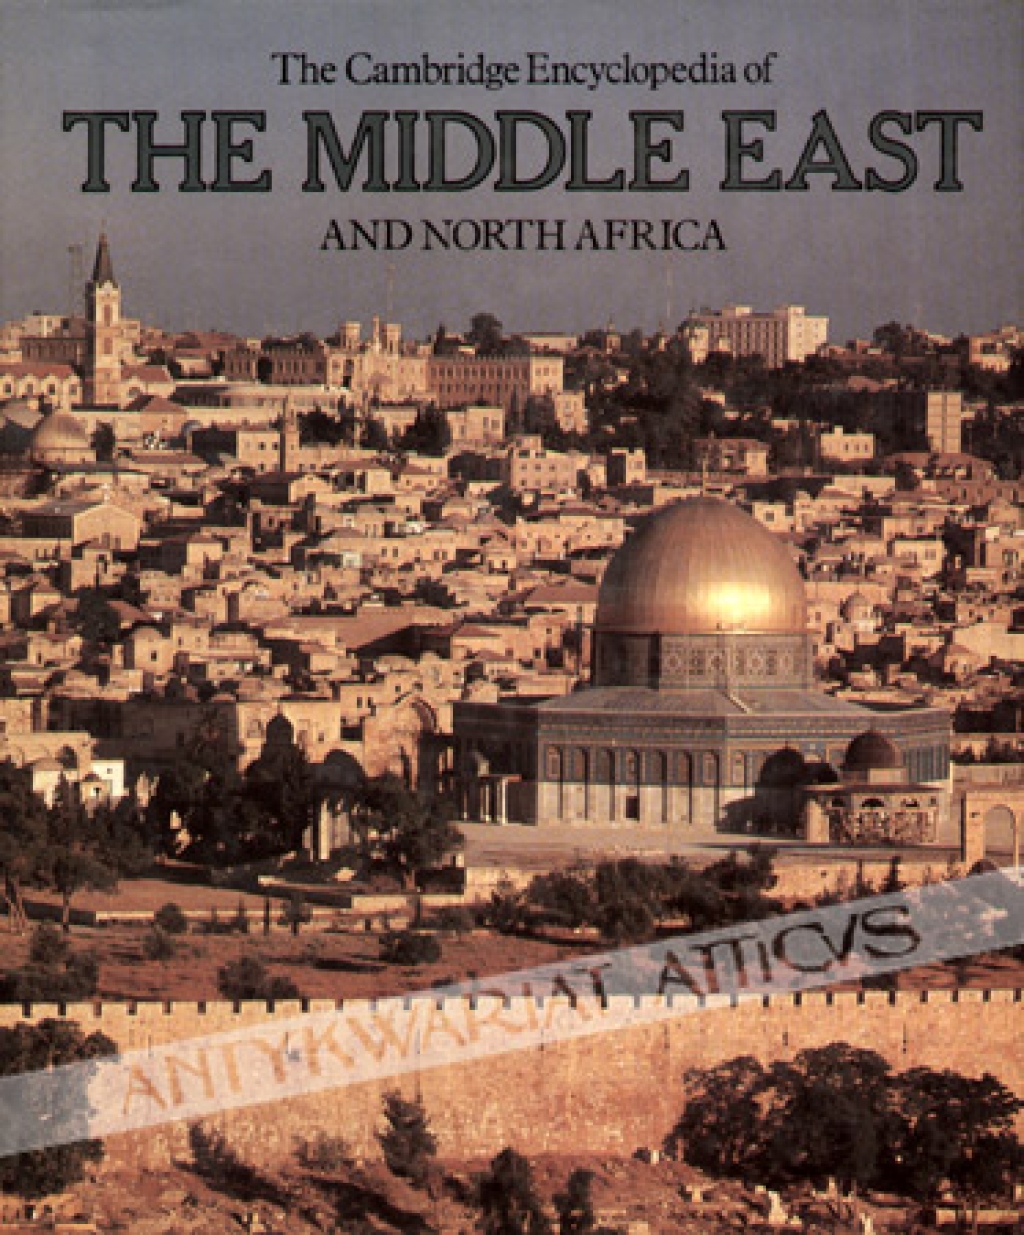 The Cambridge Encyclopedia of The Middle East and North Africa